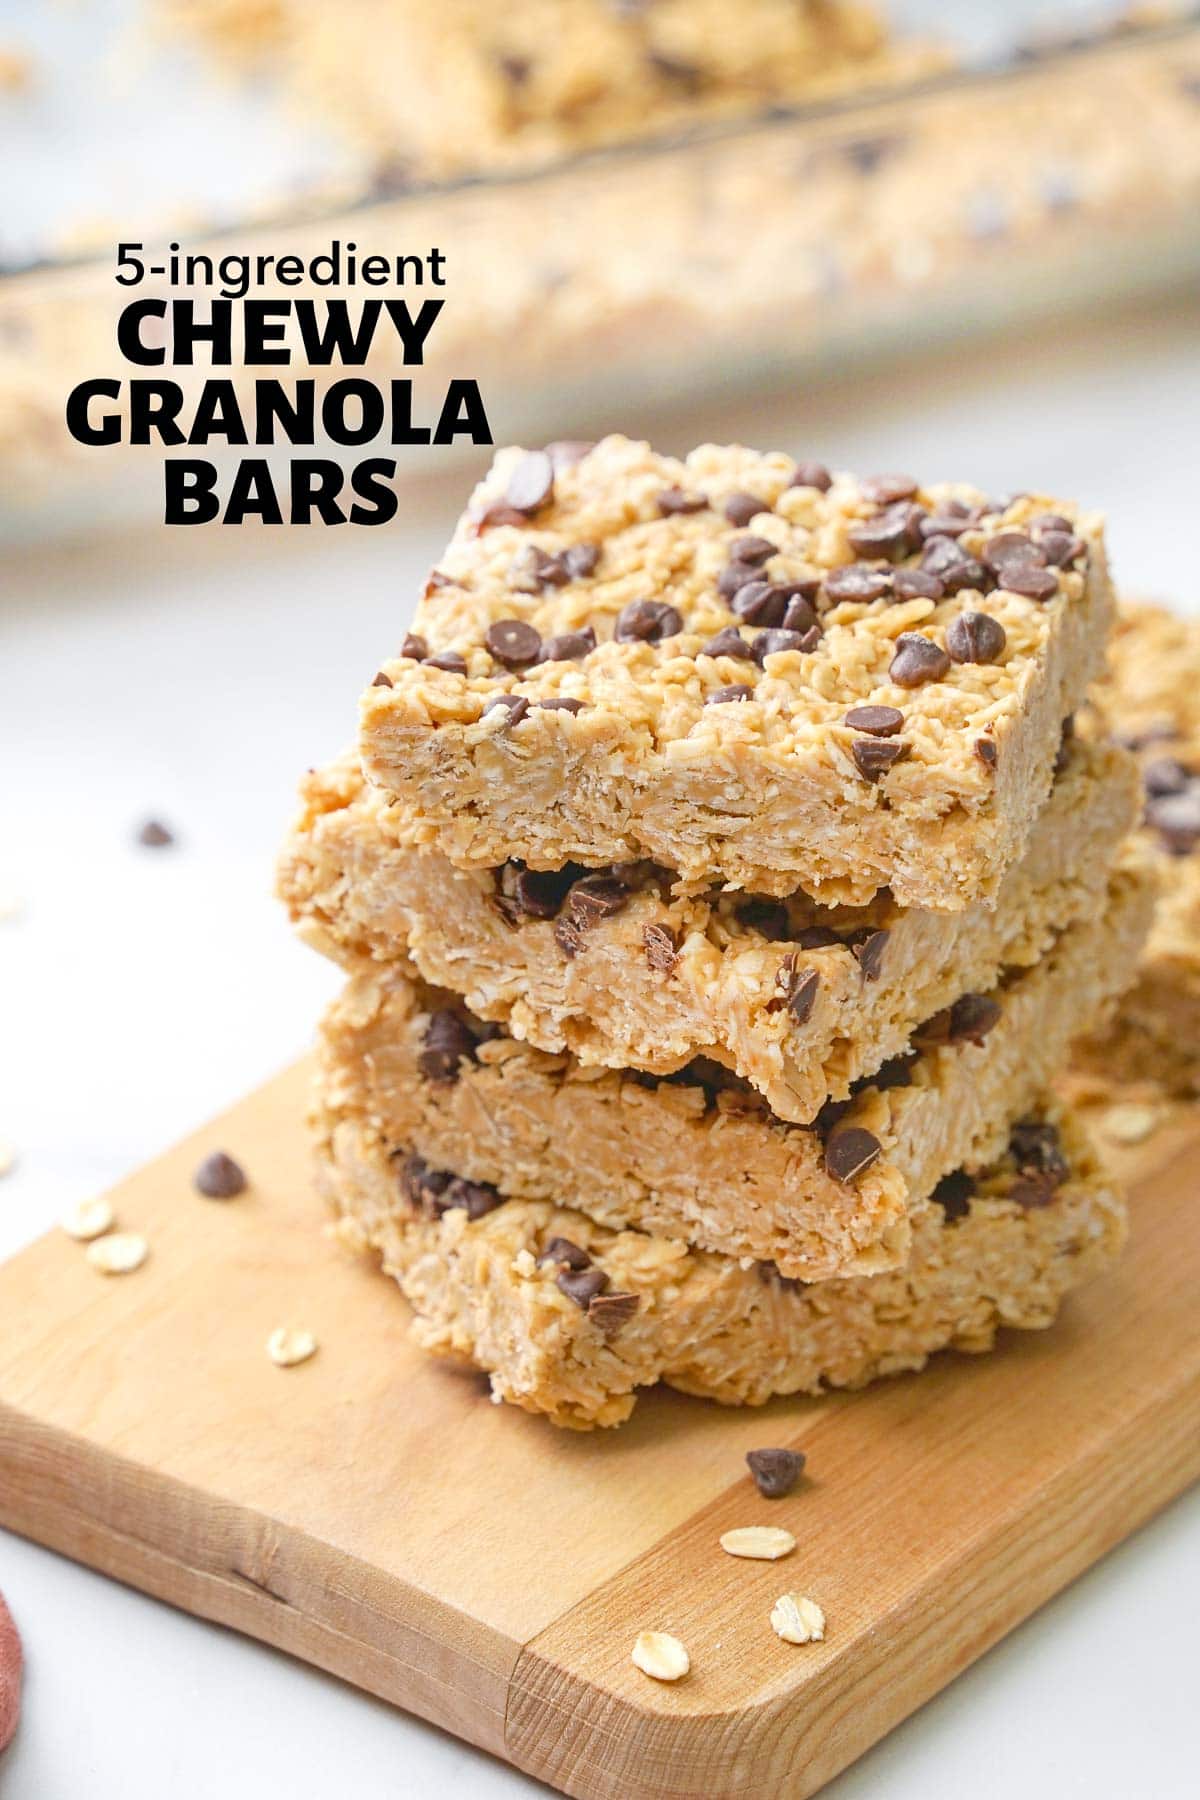 Chewy Granola Bars with text overlay.